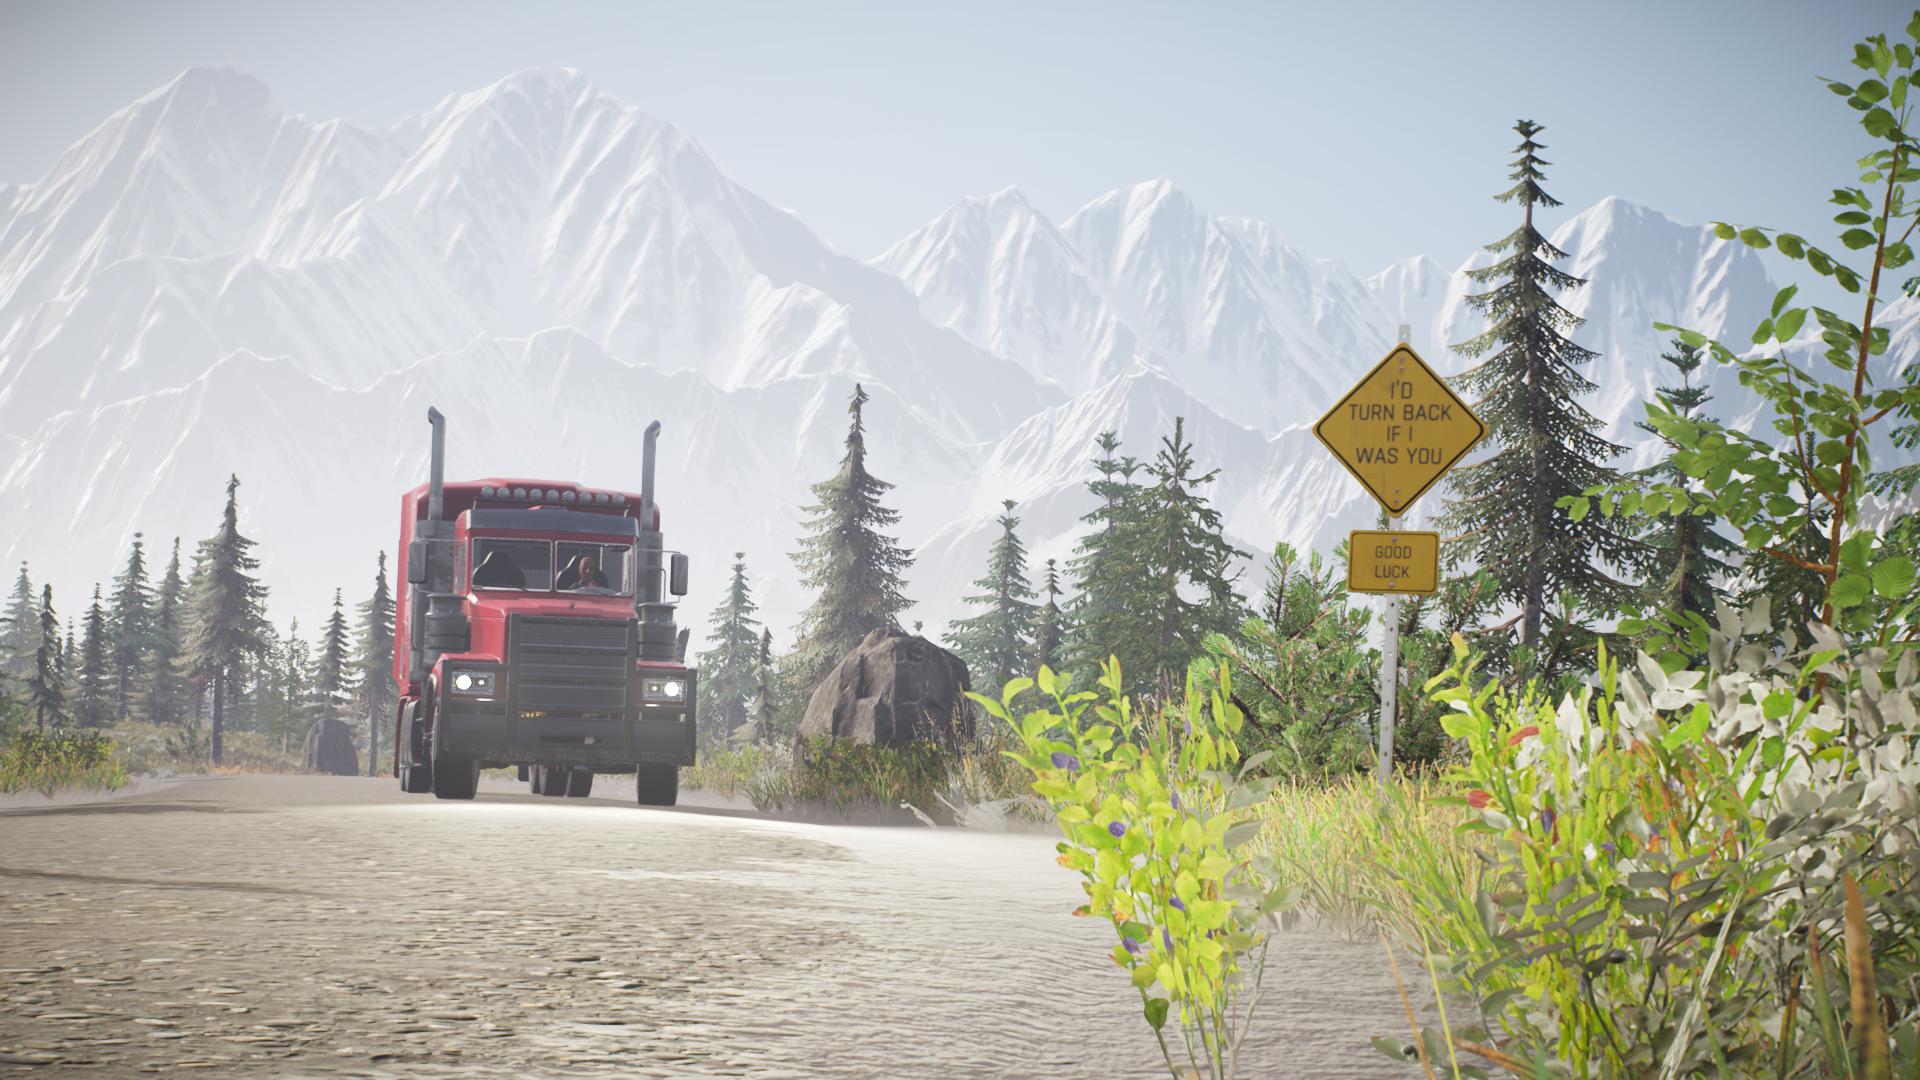 Trucking simulator game coming to PS4, Xbox One